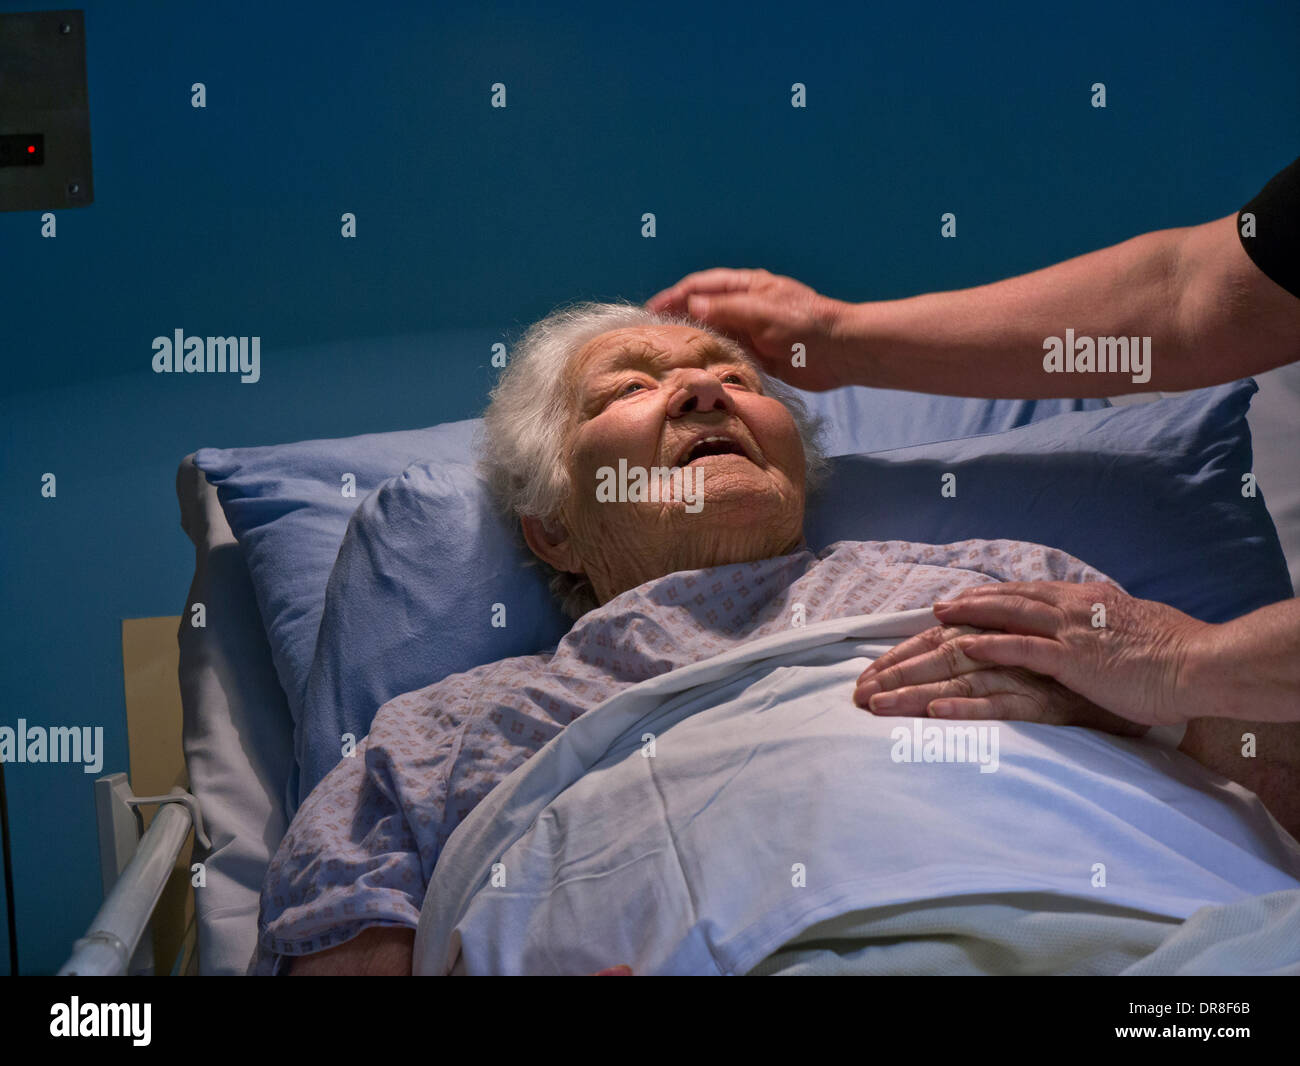 Contented smiling senior old age elderly lady in hospital bed with comforting hand of carer nurse Stock Photo